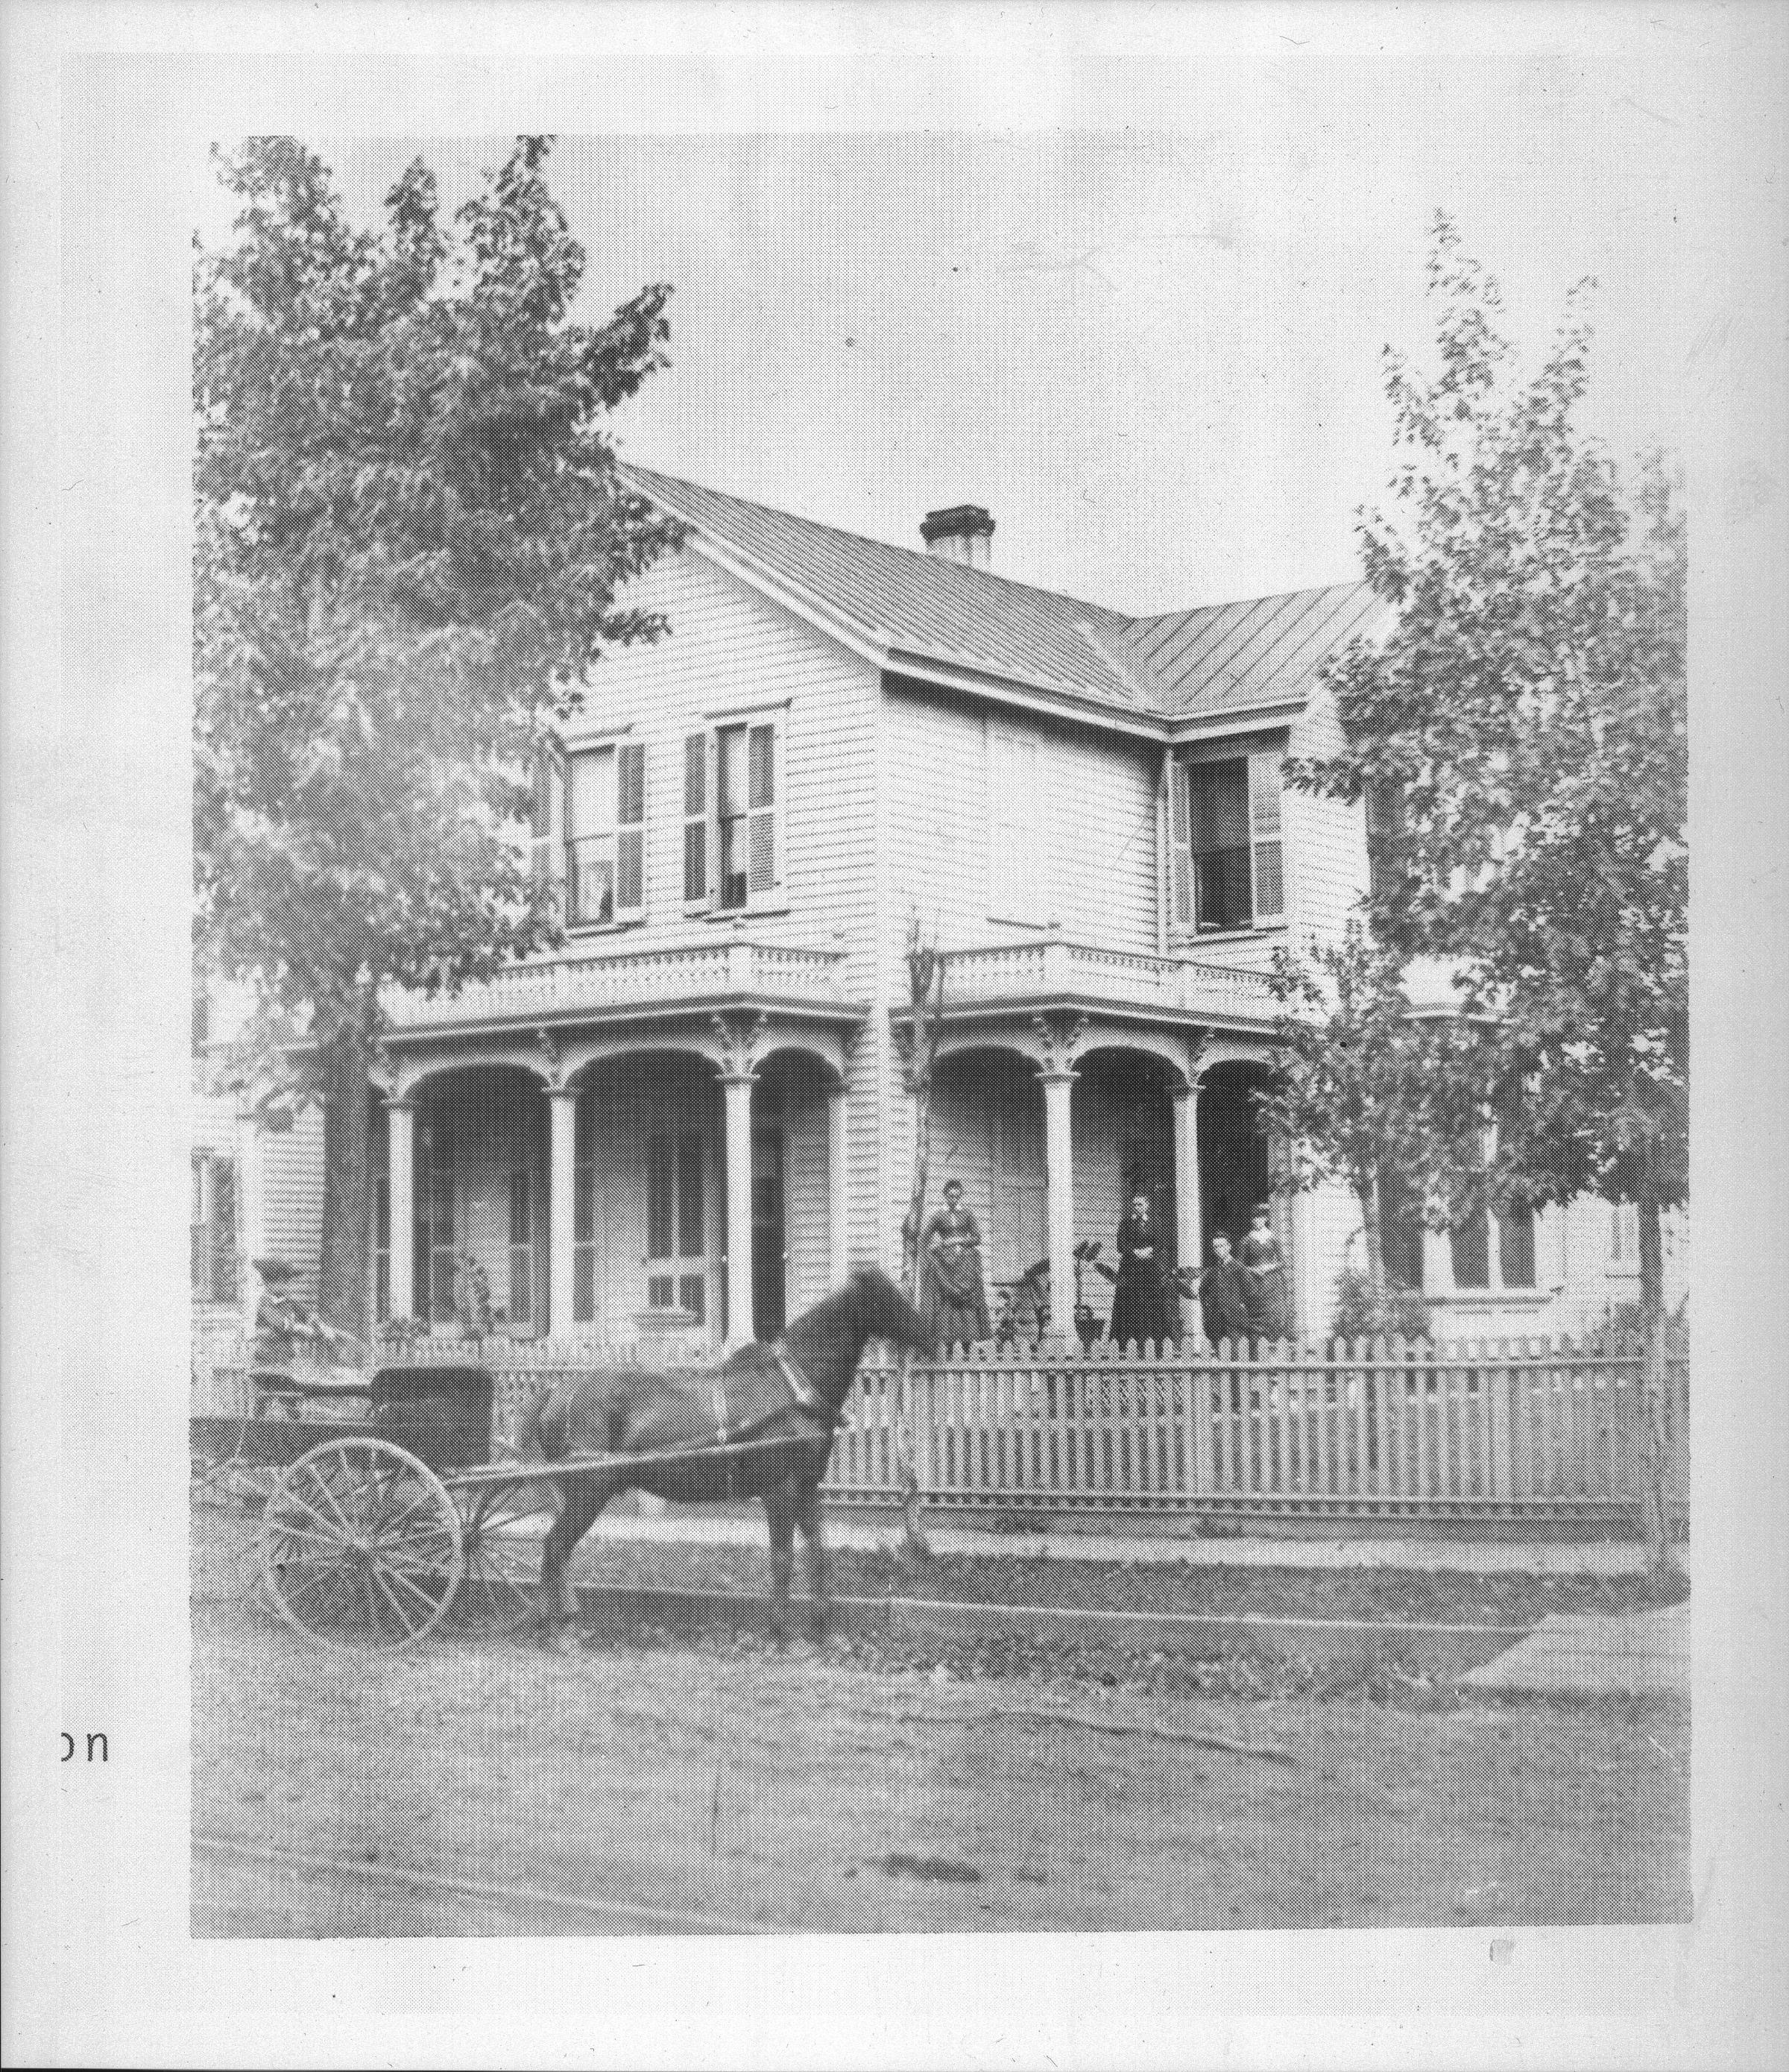 People on porch, horse and waggon in front. Robinson house, South Eighth street. Portraits, Robinson